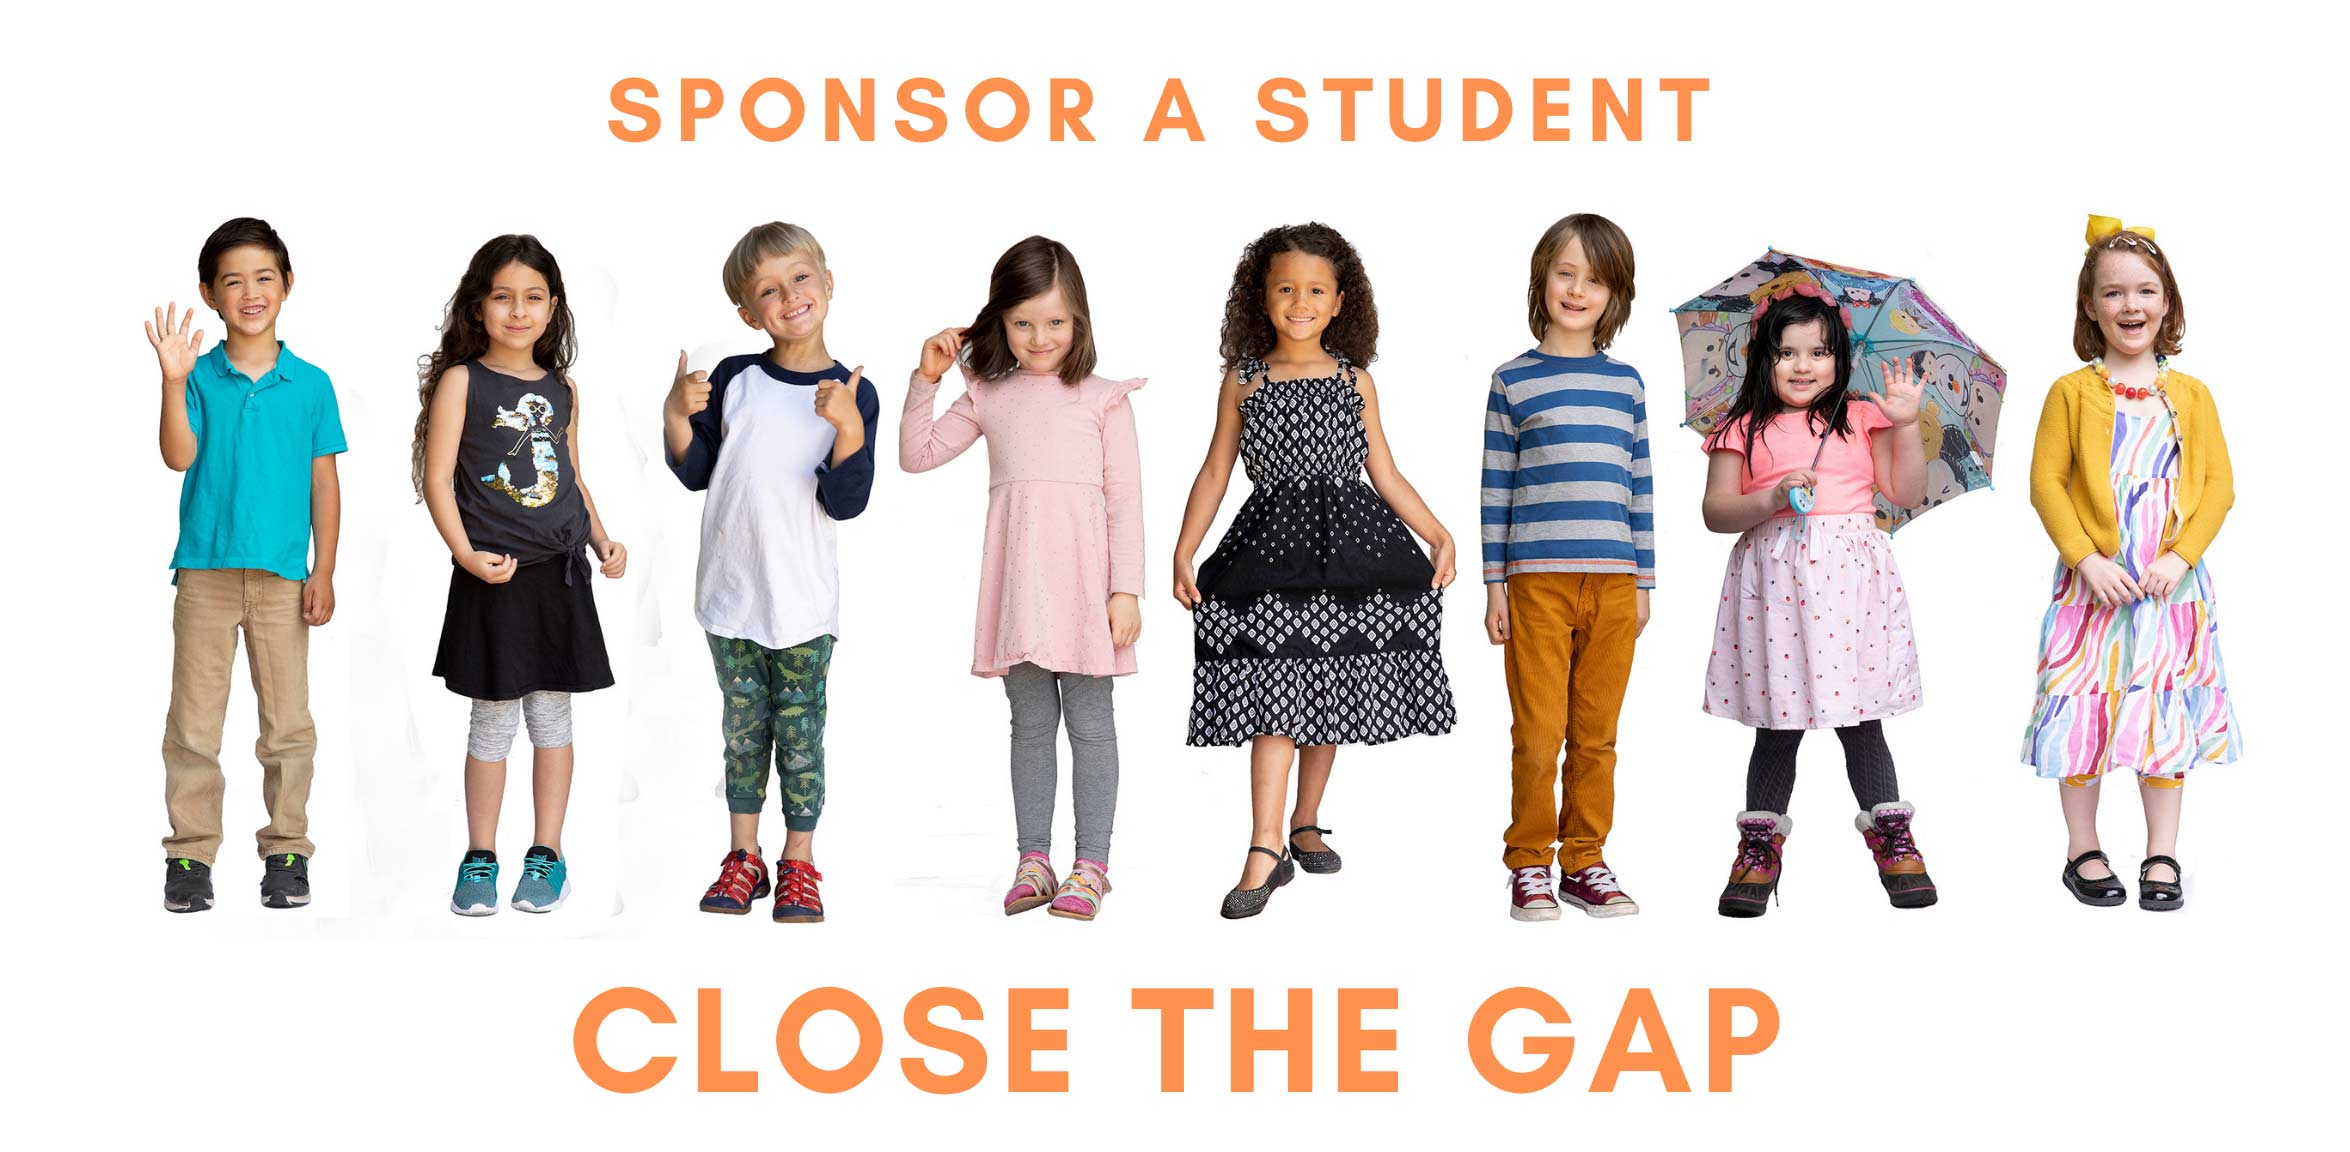 Images of young school children with text Sponsor a Student, Close the Gap